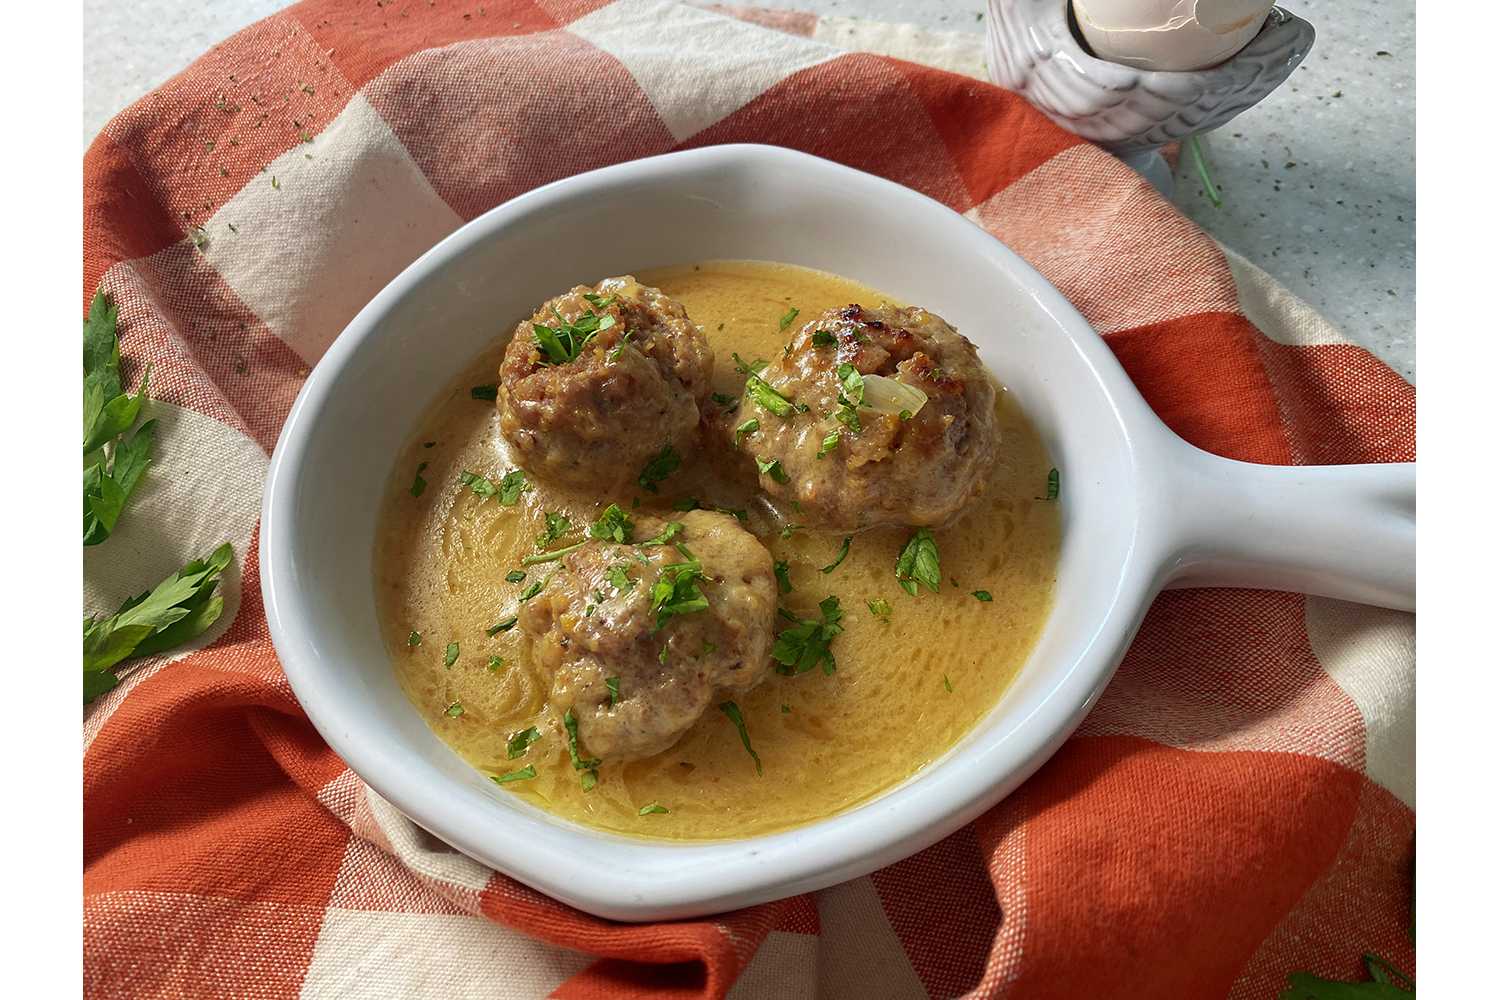 Three big meatballs in yellow sauce with chopped parsley on top in white bowl with handle